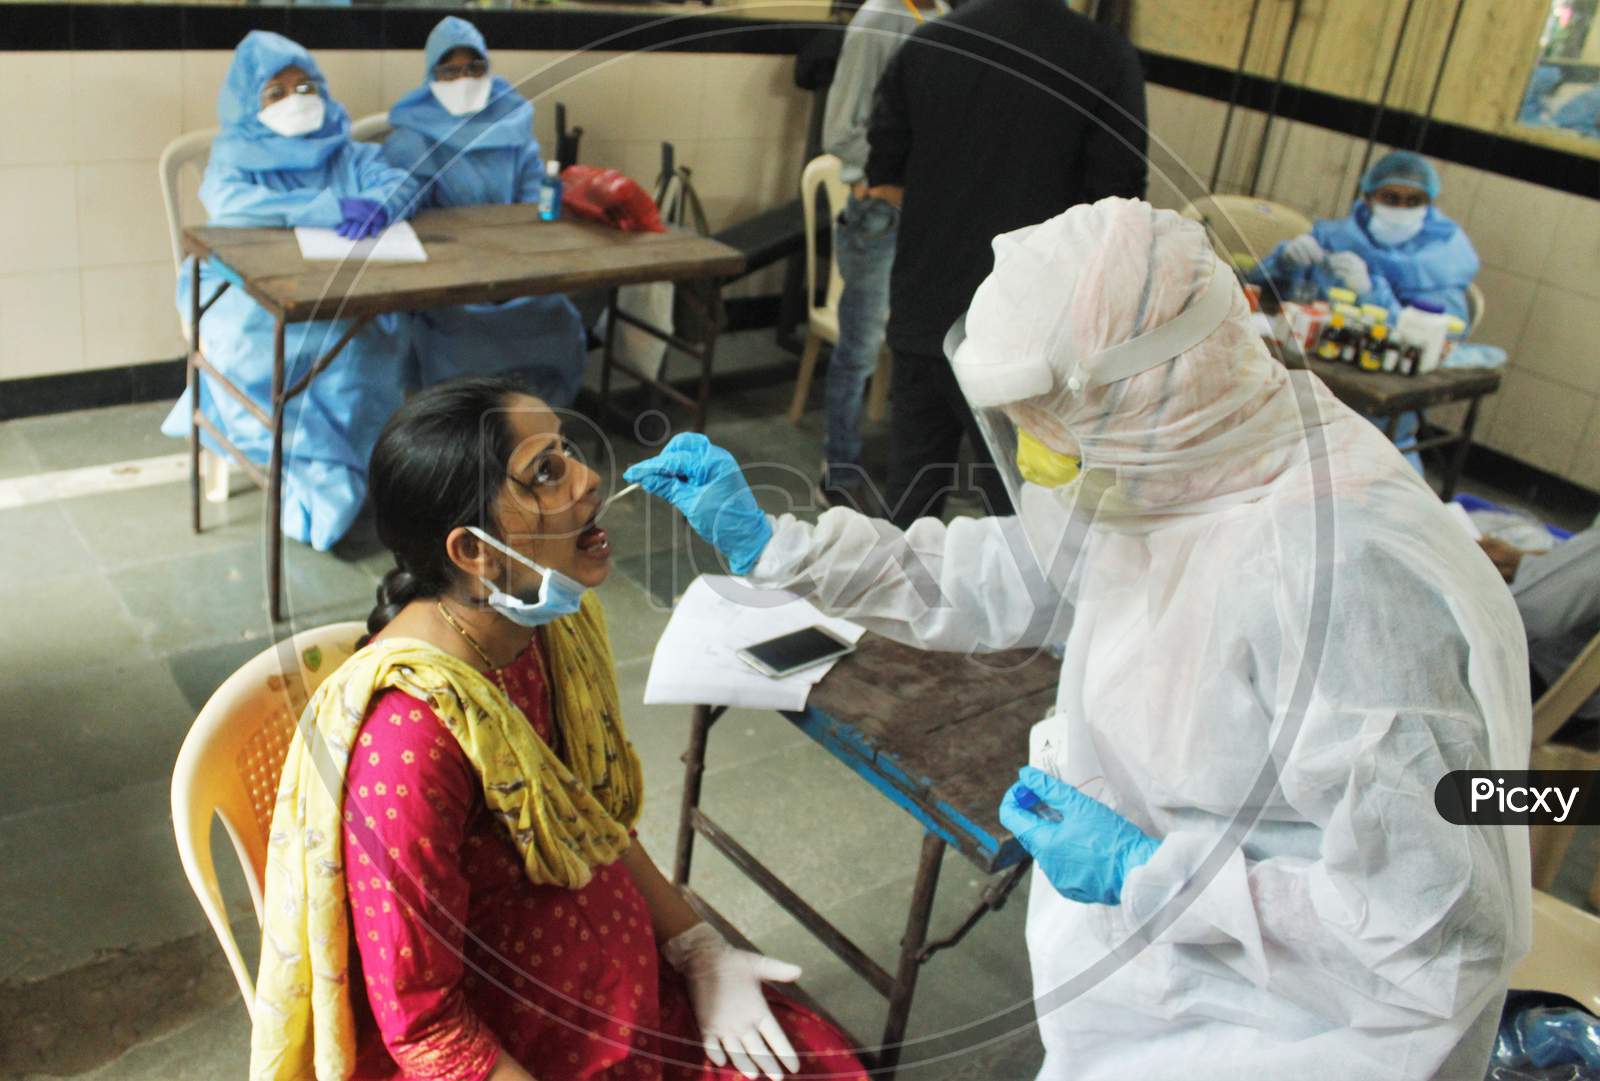 A healthcare worker wearing personal protective equipment (PPE) collects a swab sample from a pregnant woman, during a check-up campaign for the coronavirus disease (COVID-19), in Mumbai, India on July 1, 2020.